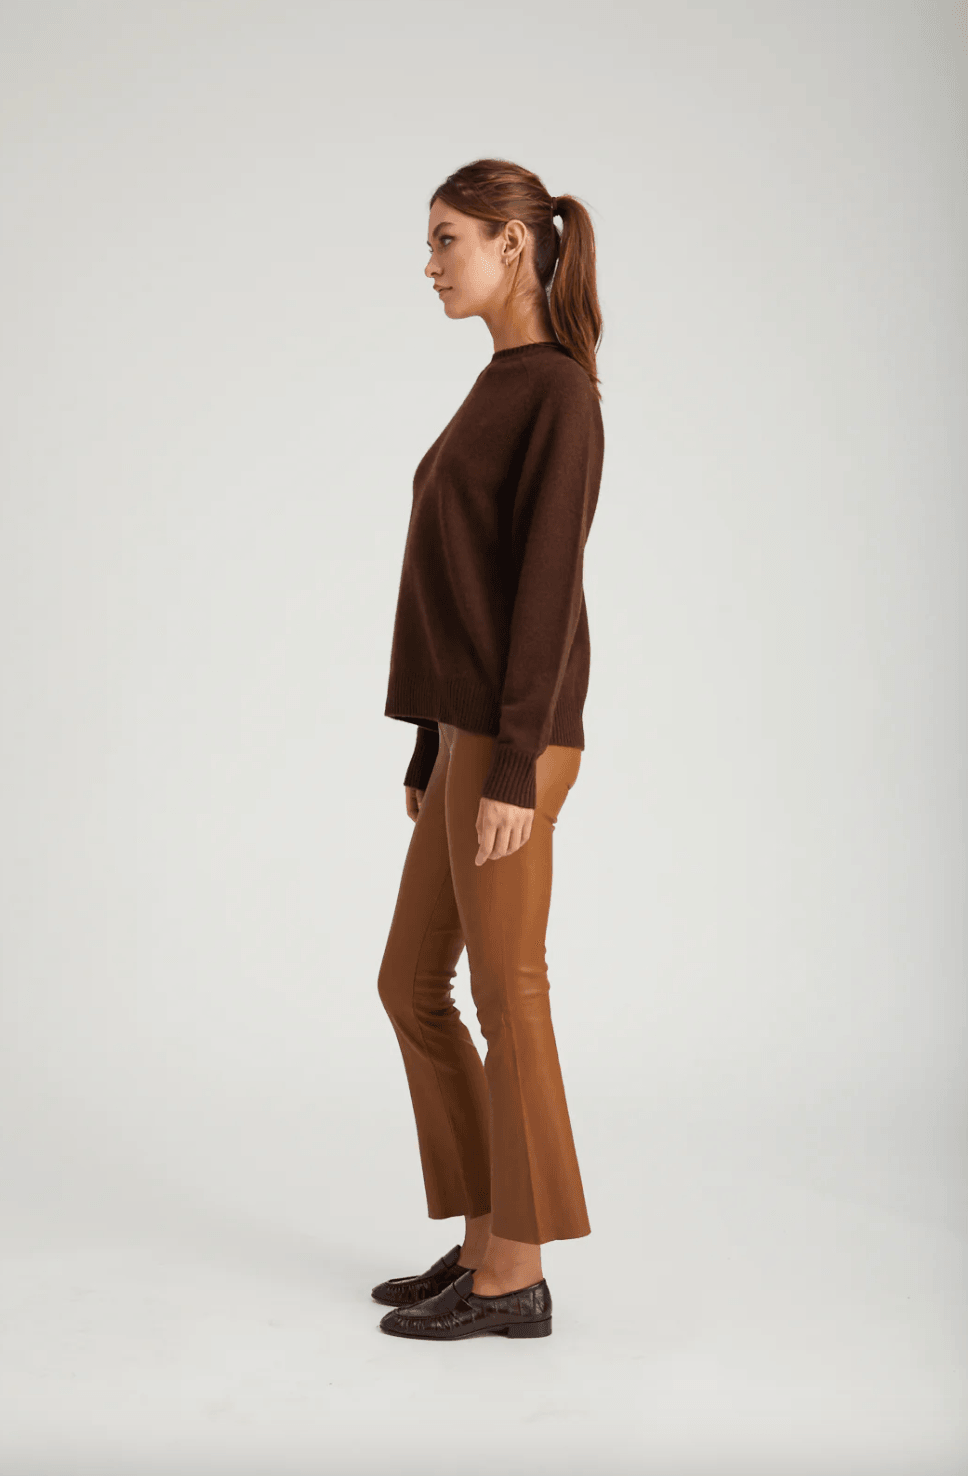 Ankle Flare Leather Legging in Walnut by SPRWMN - Haven